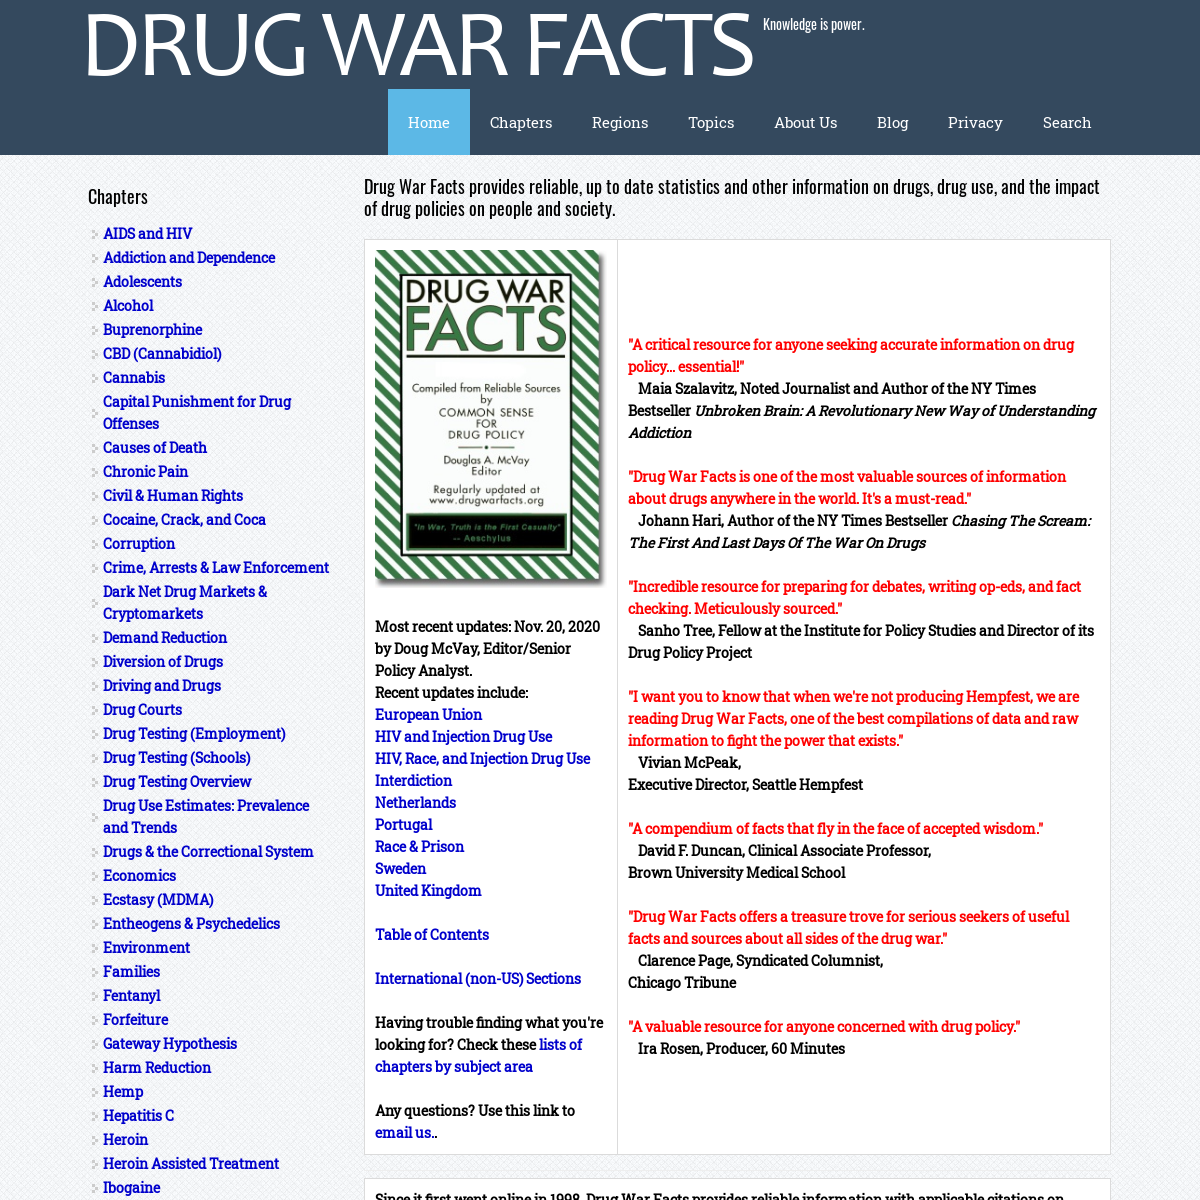 A complete backup of drugwarfacts.org